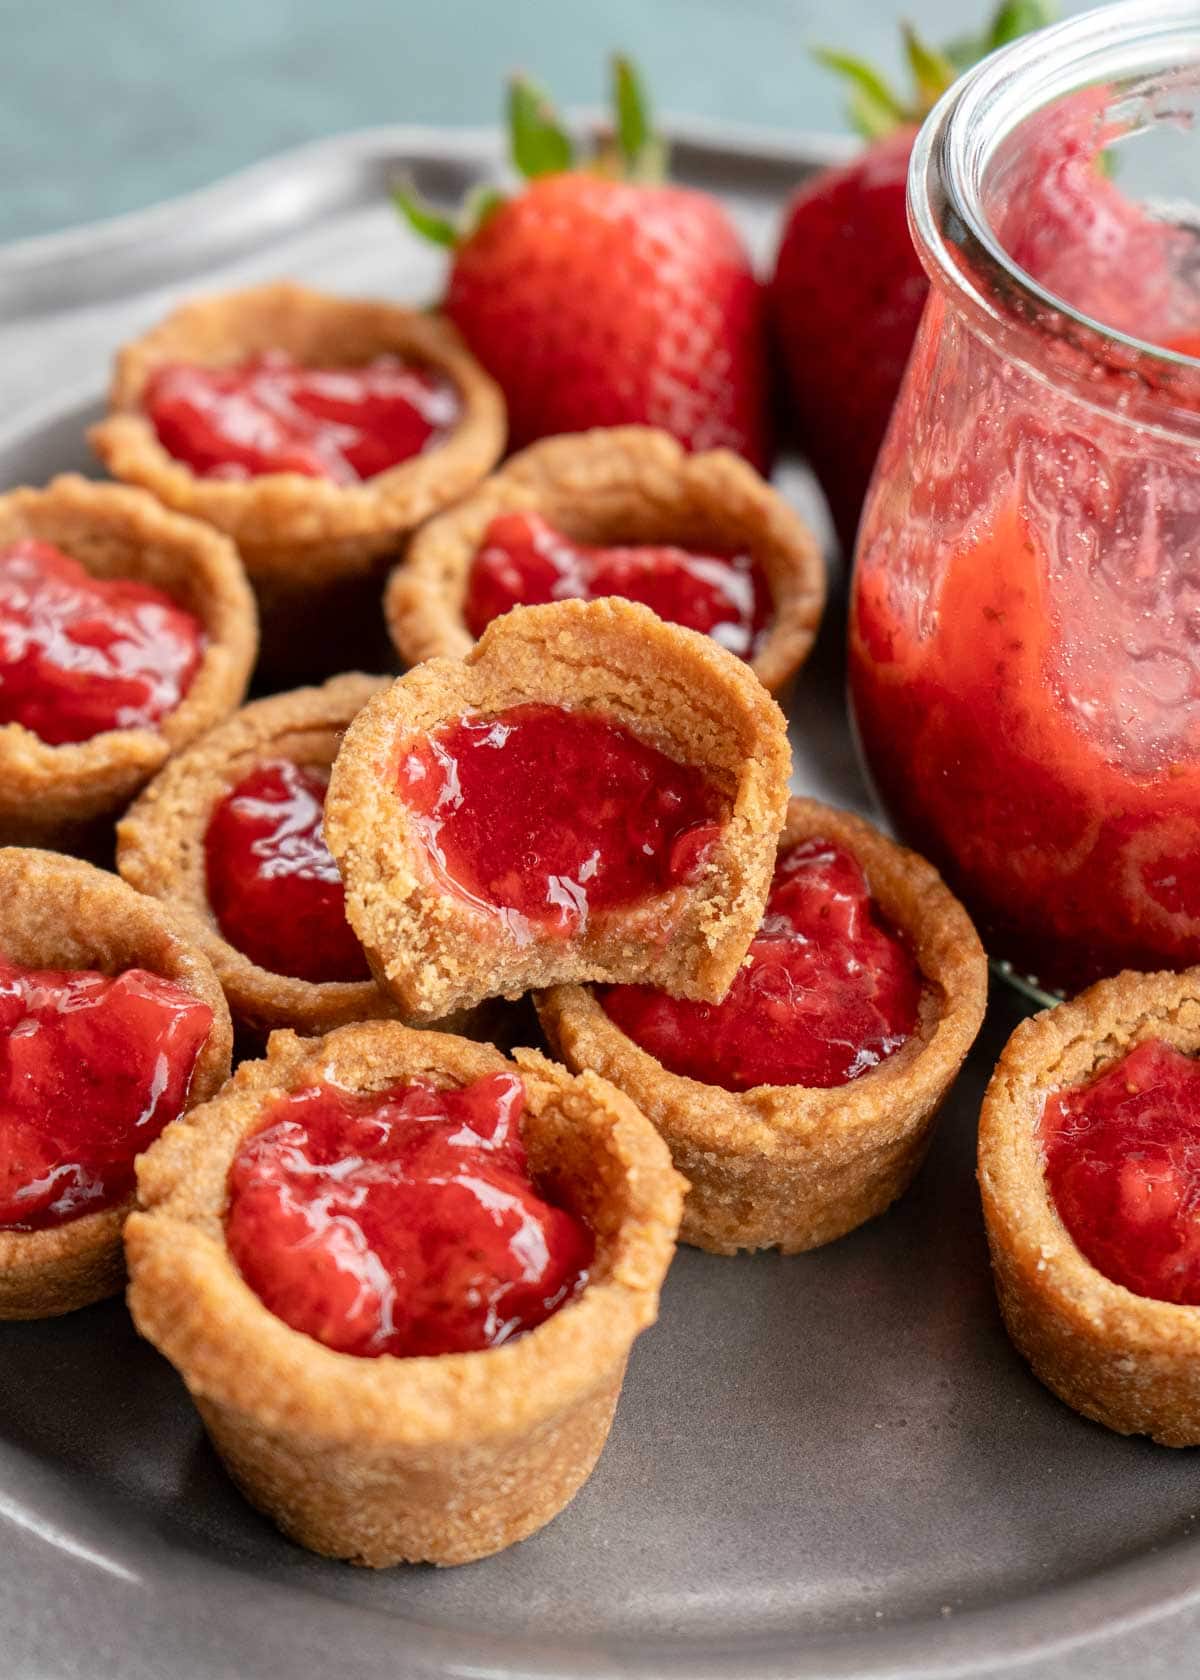 Keto Peanut Butter and Jelly Cookie Cups